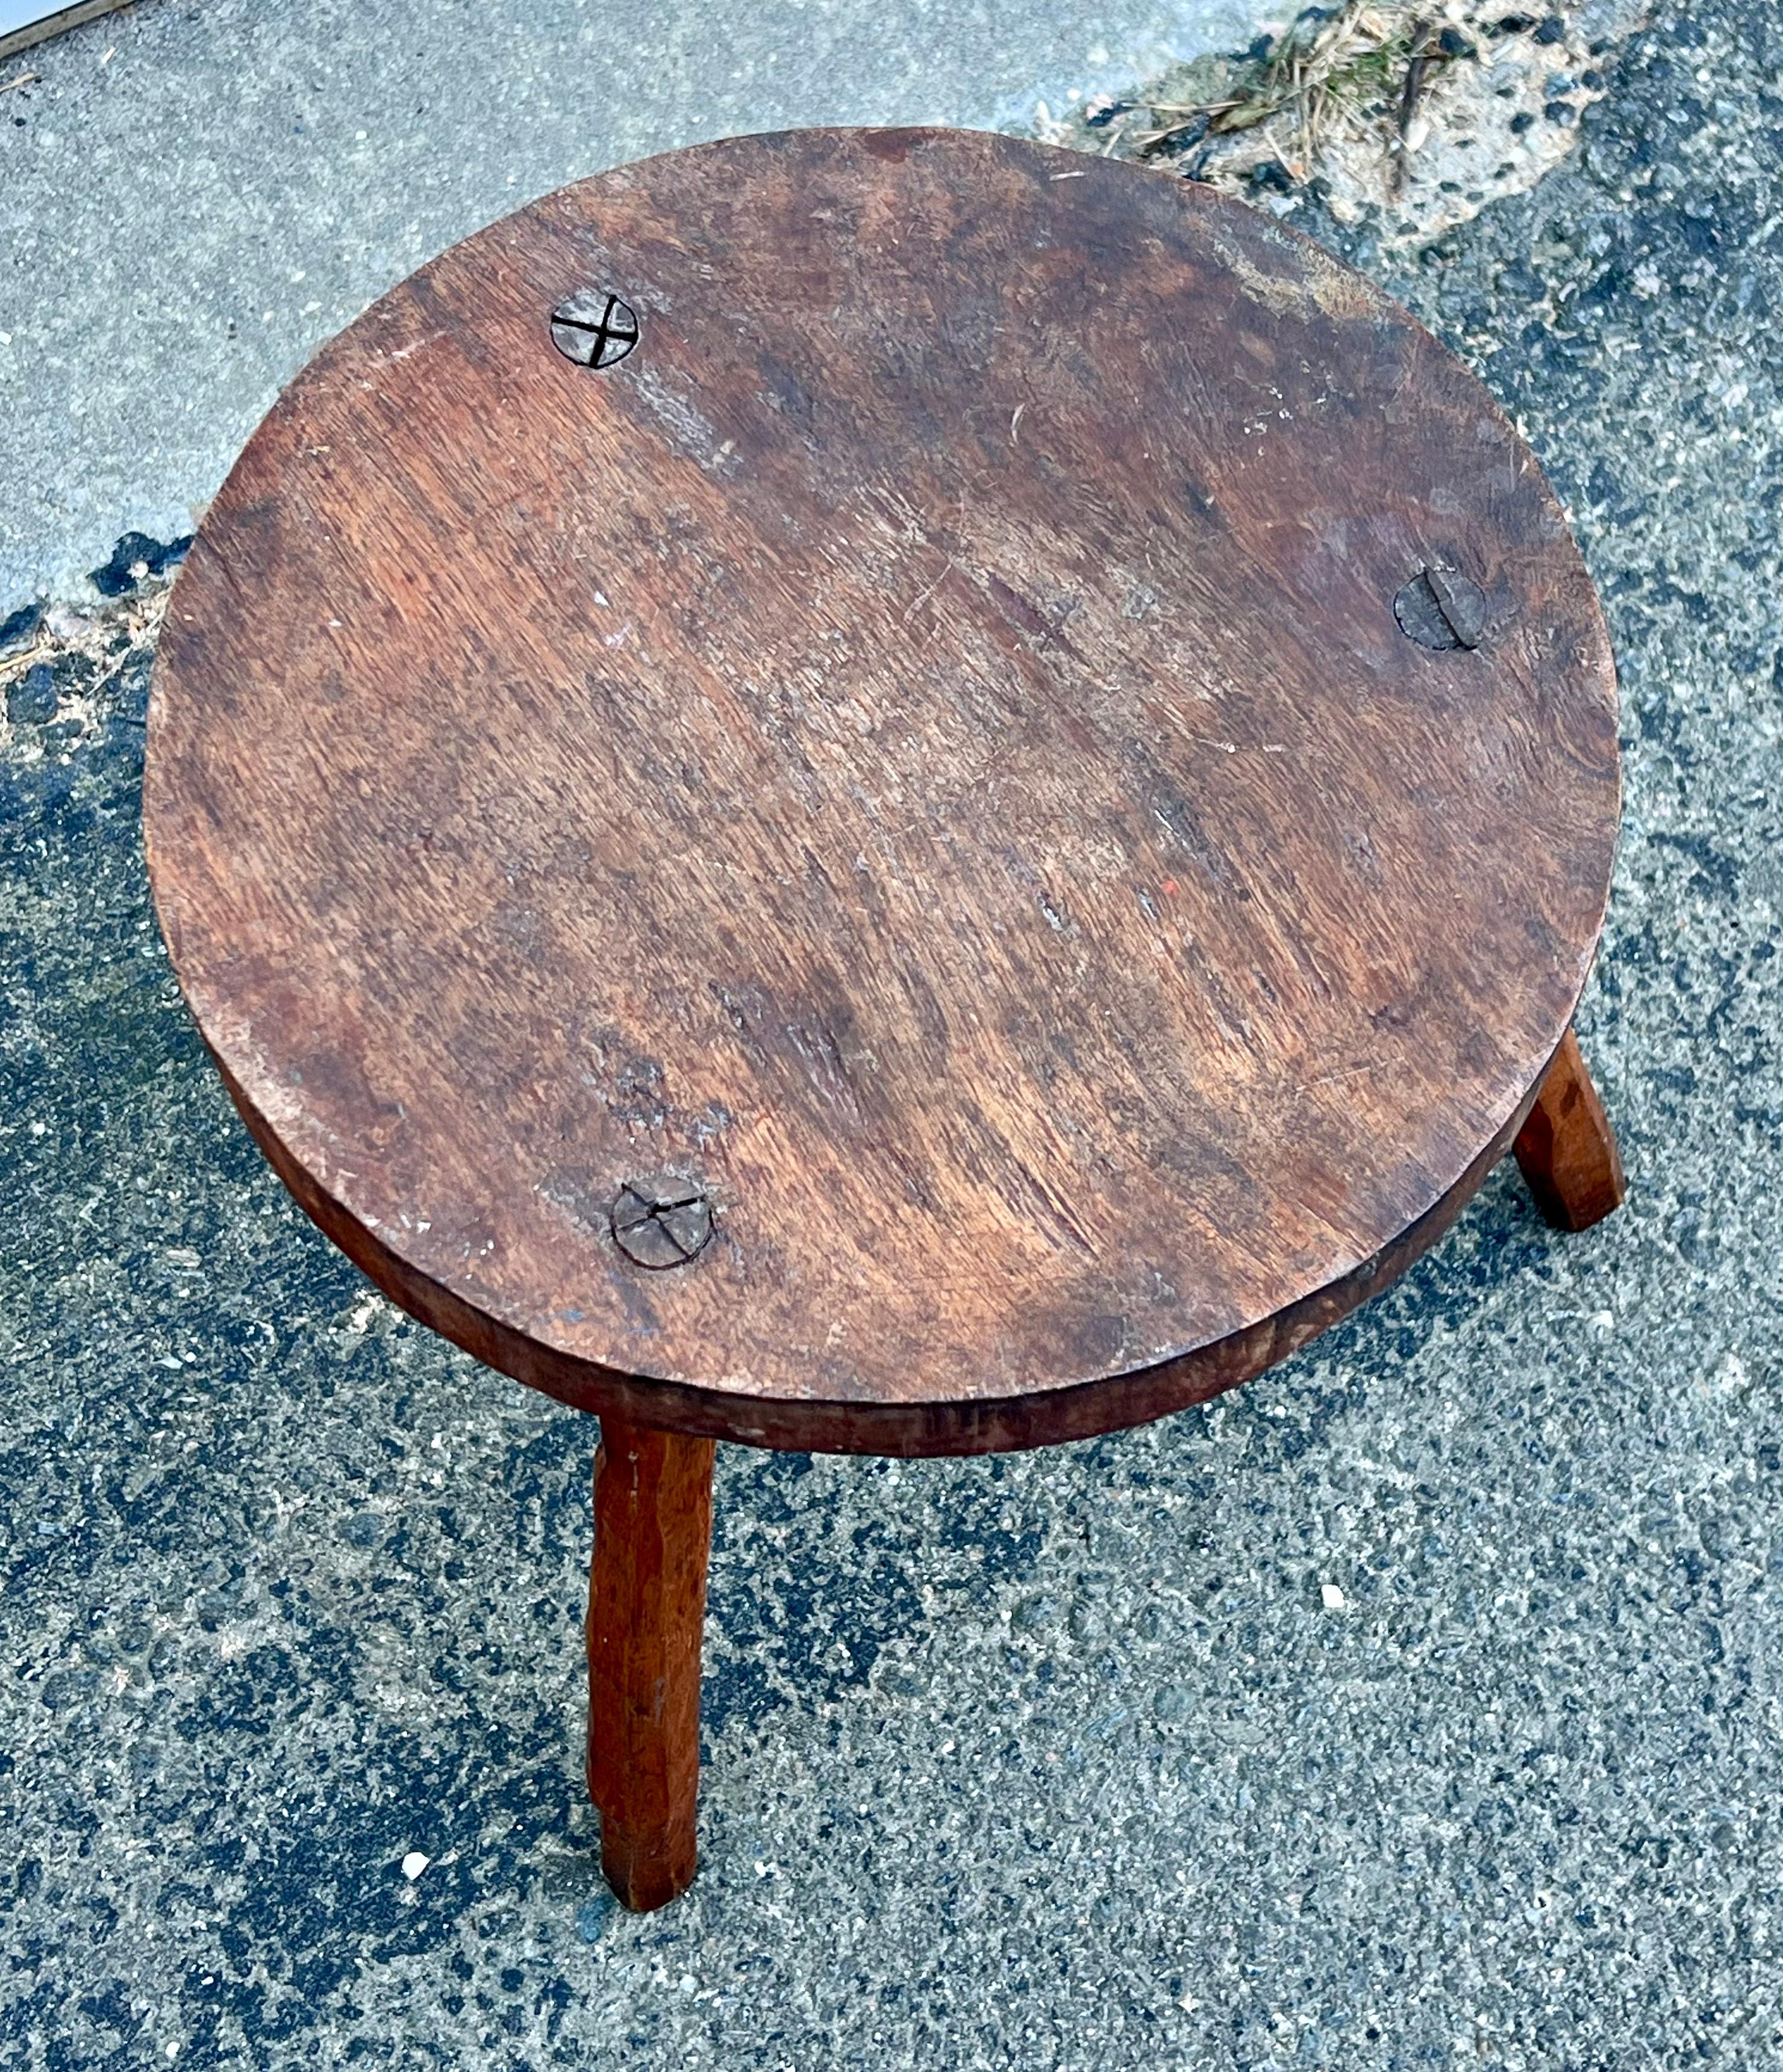 Stout little 19th century country joint stool with sturdy plank seat and low legs.